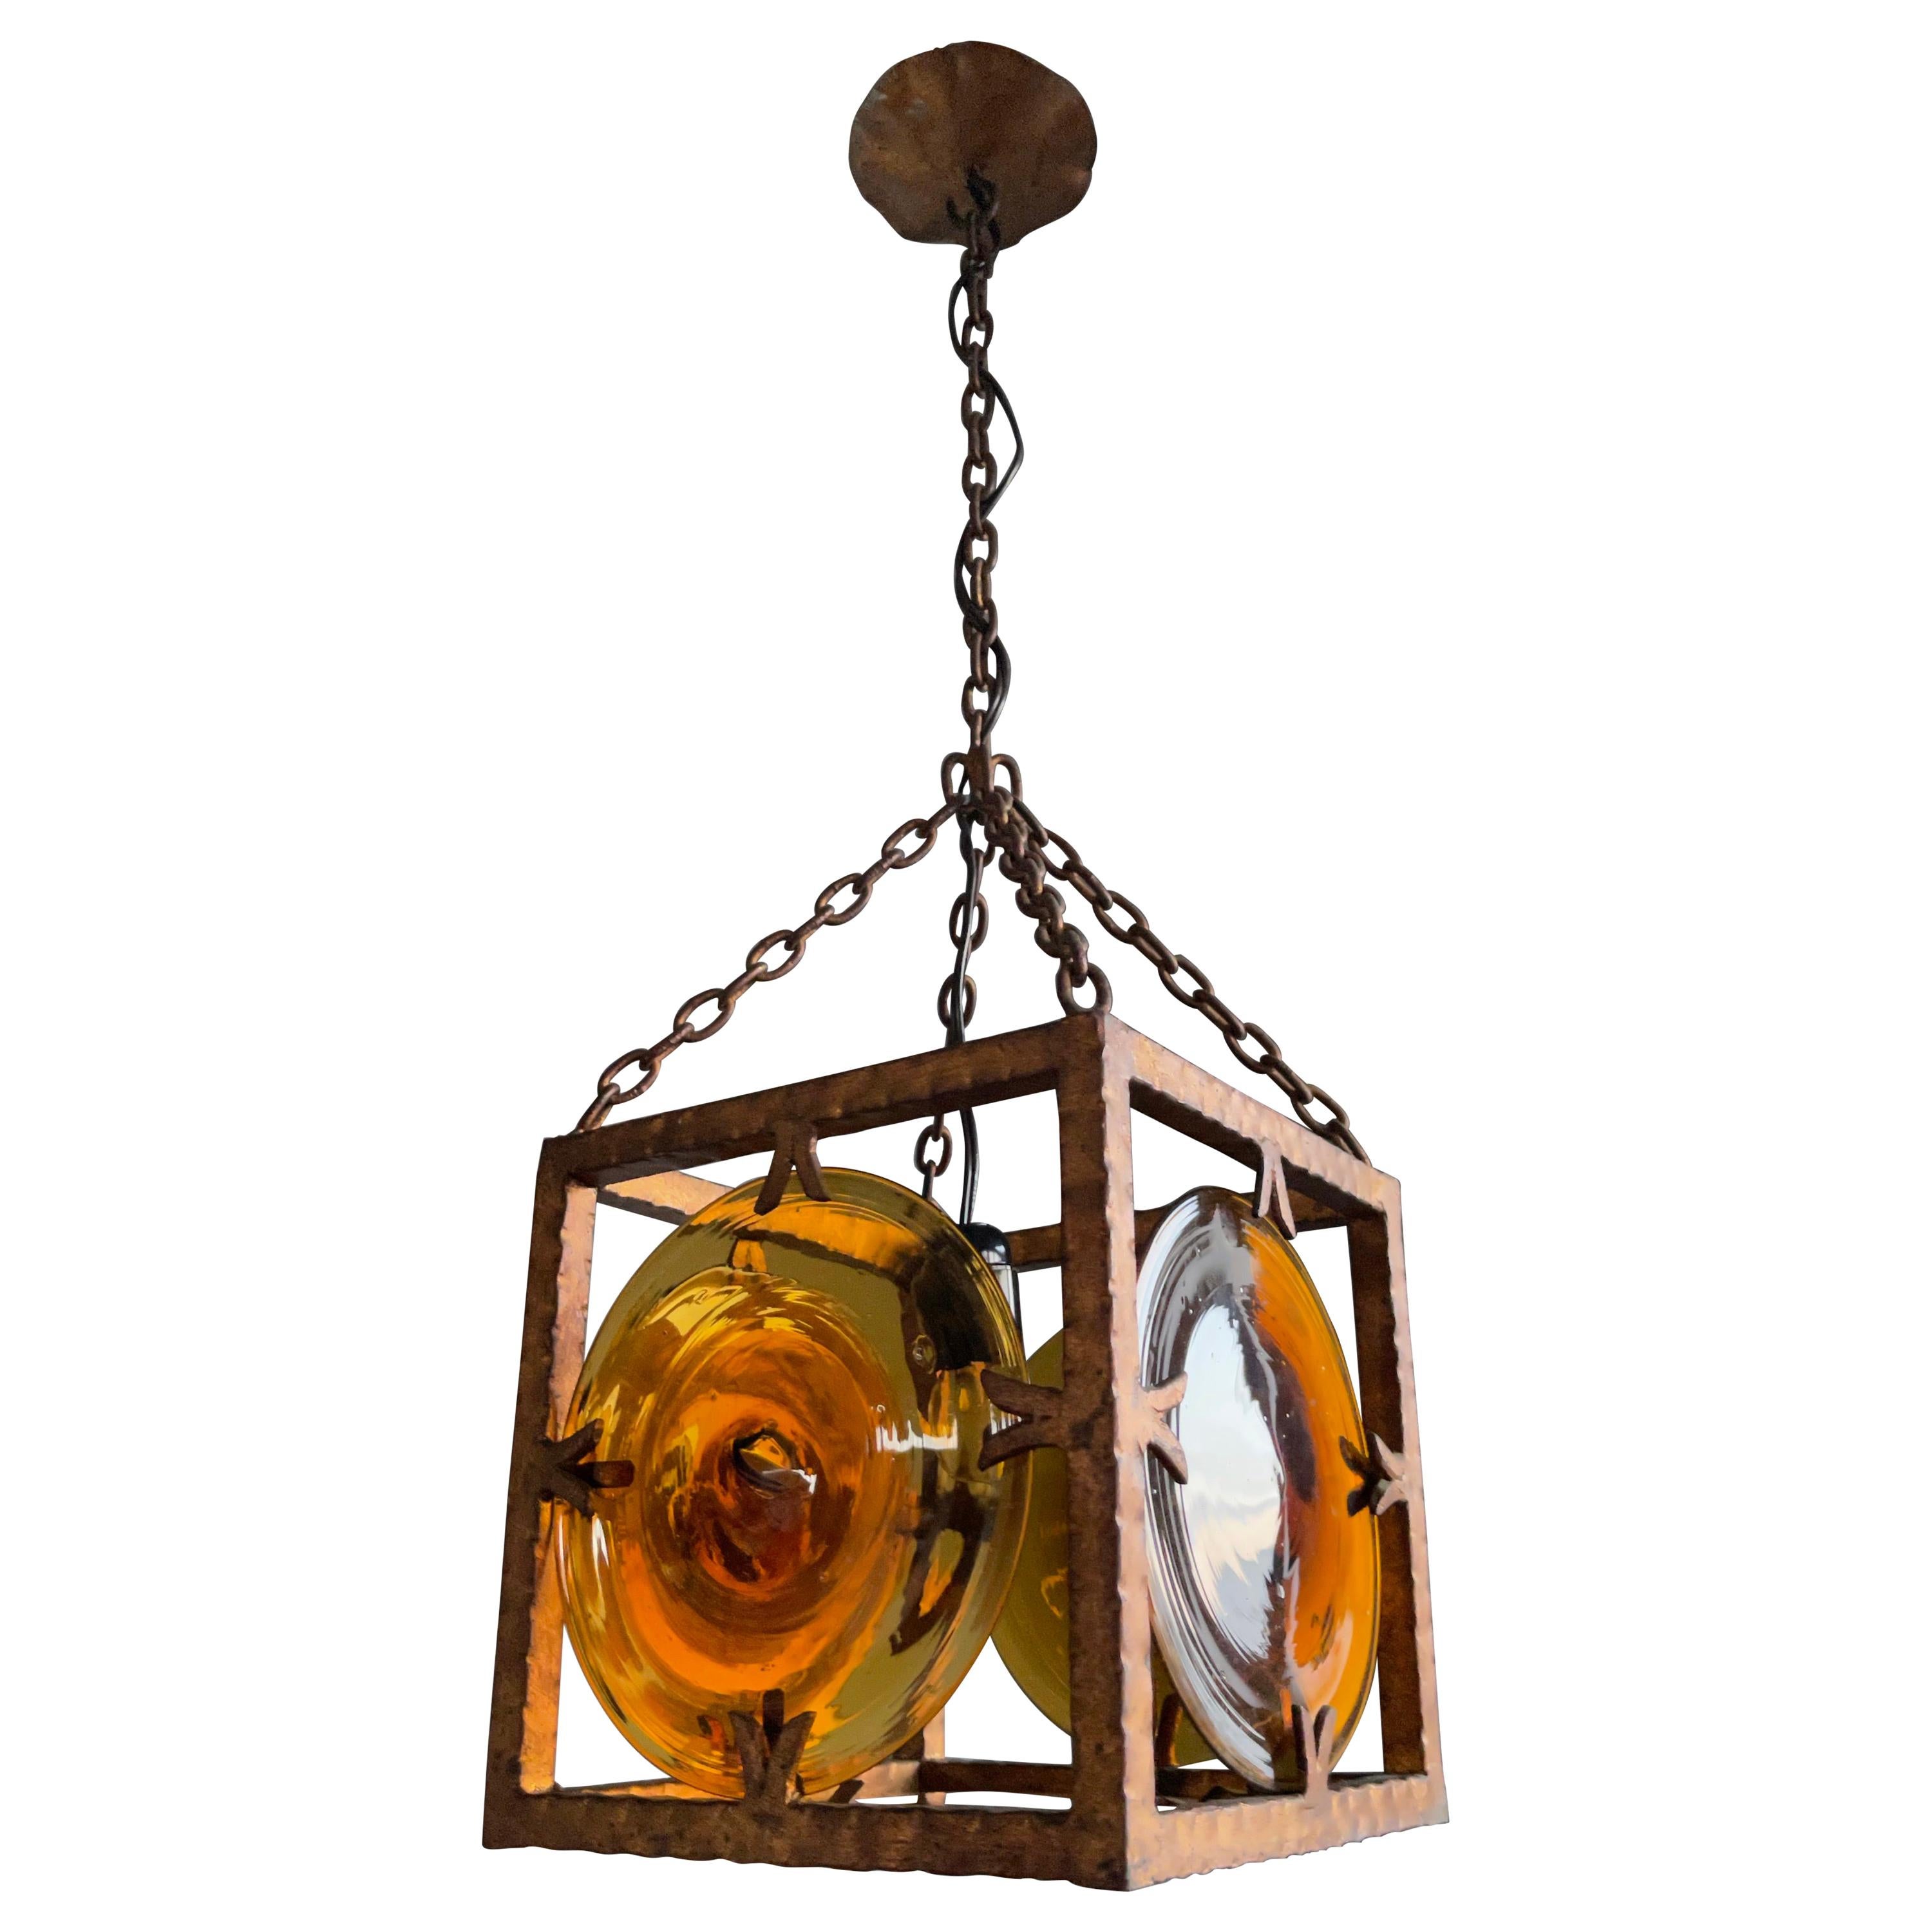 Midcentury Brutalist Pendant Light with Stunning Murano Mouth Blown Glass Discs